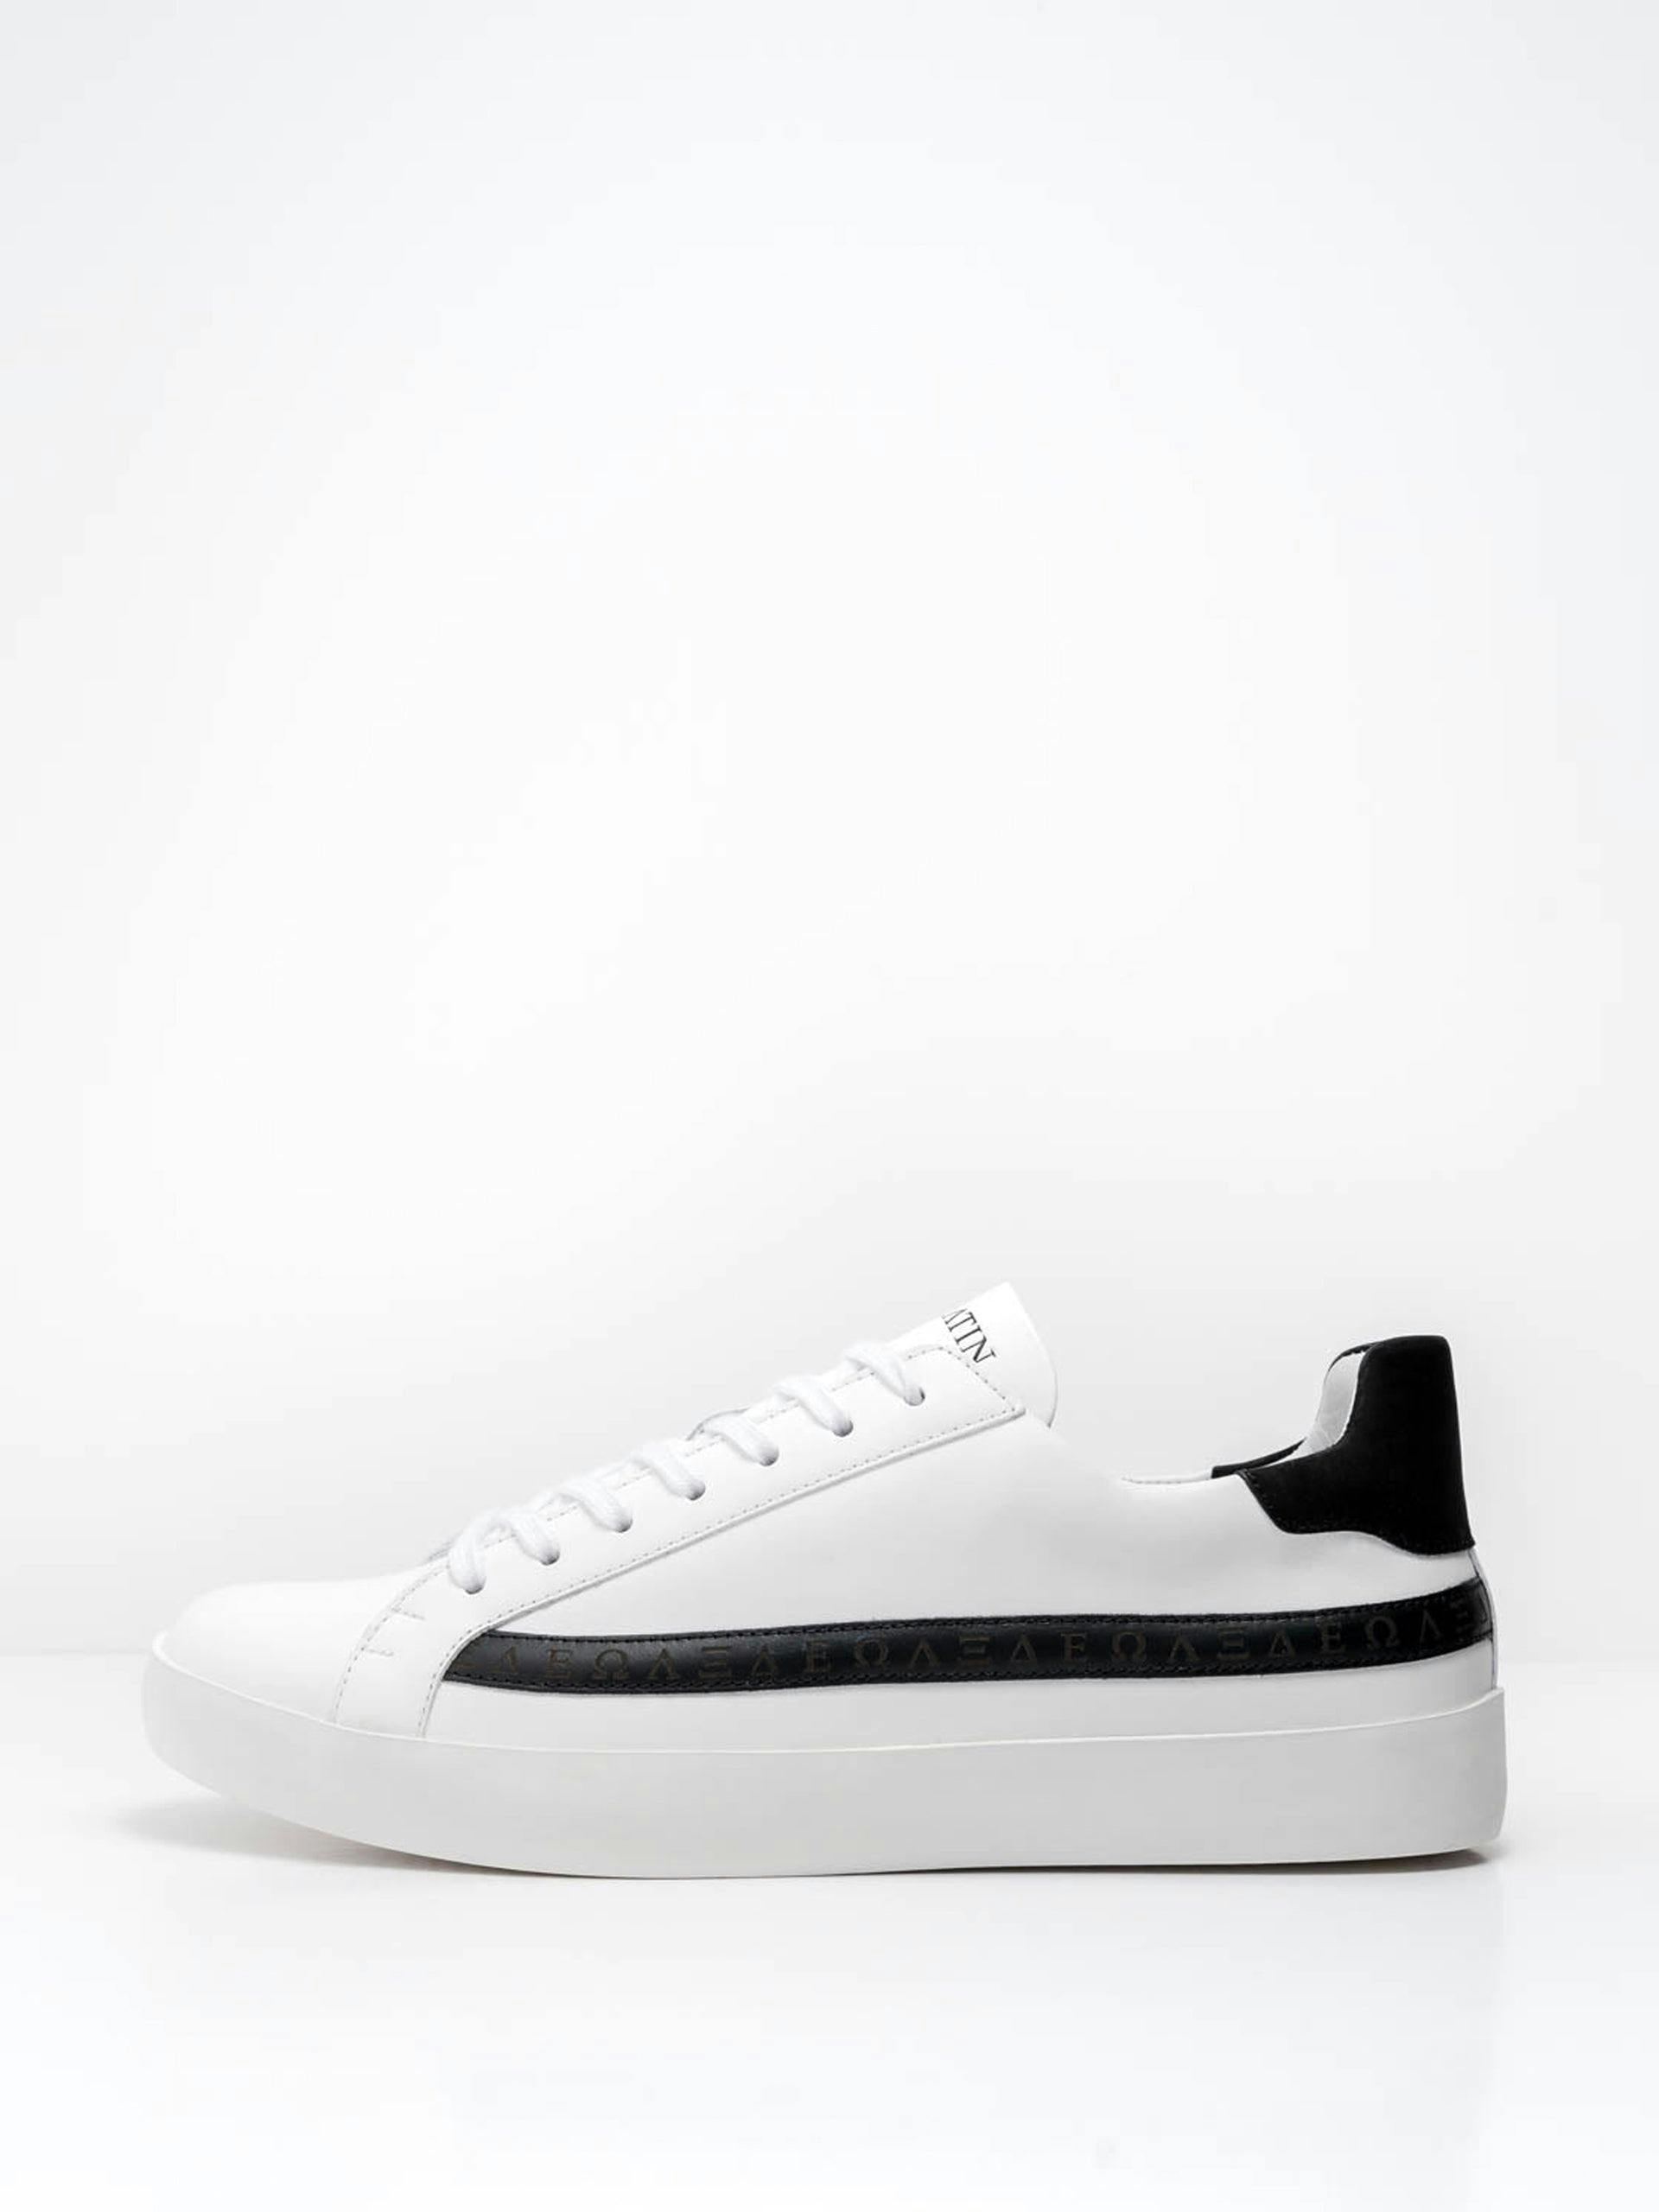 The TATA white and black women's trainers